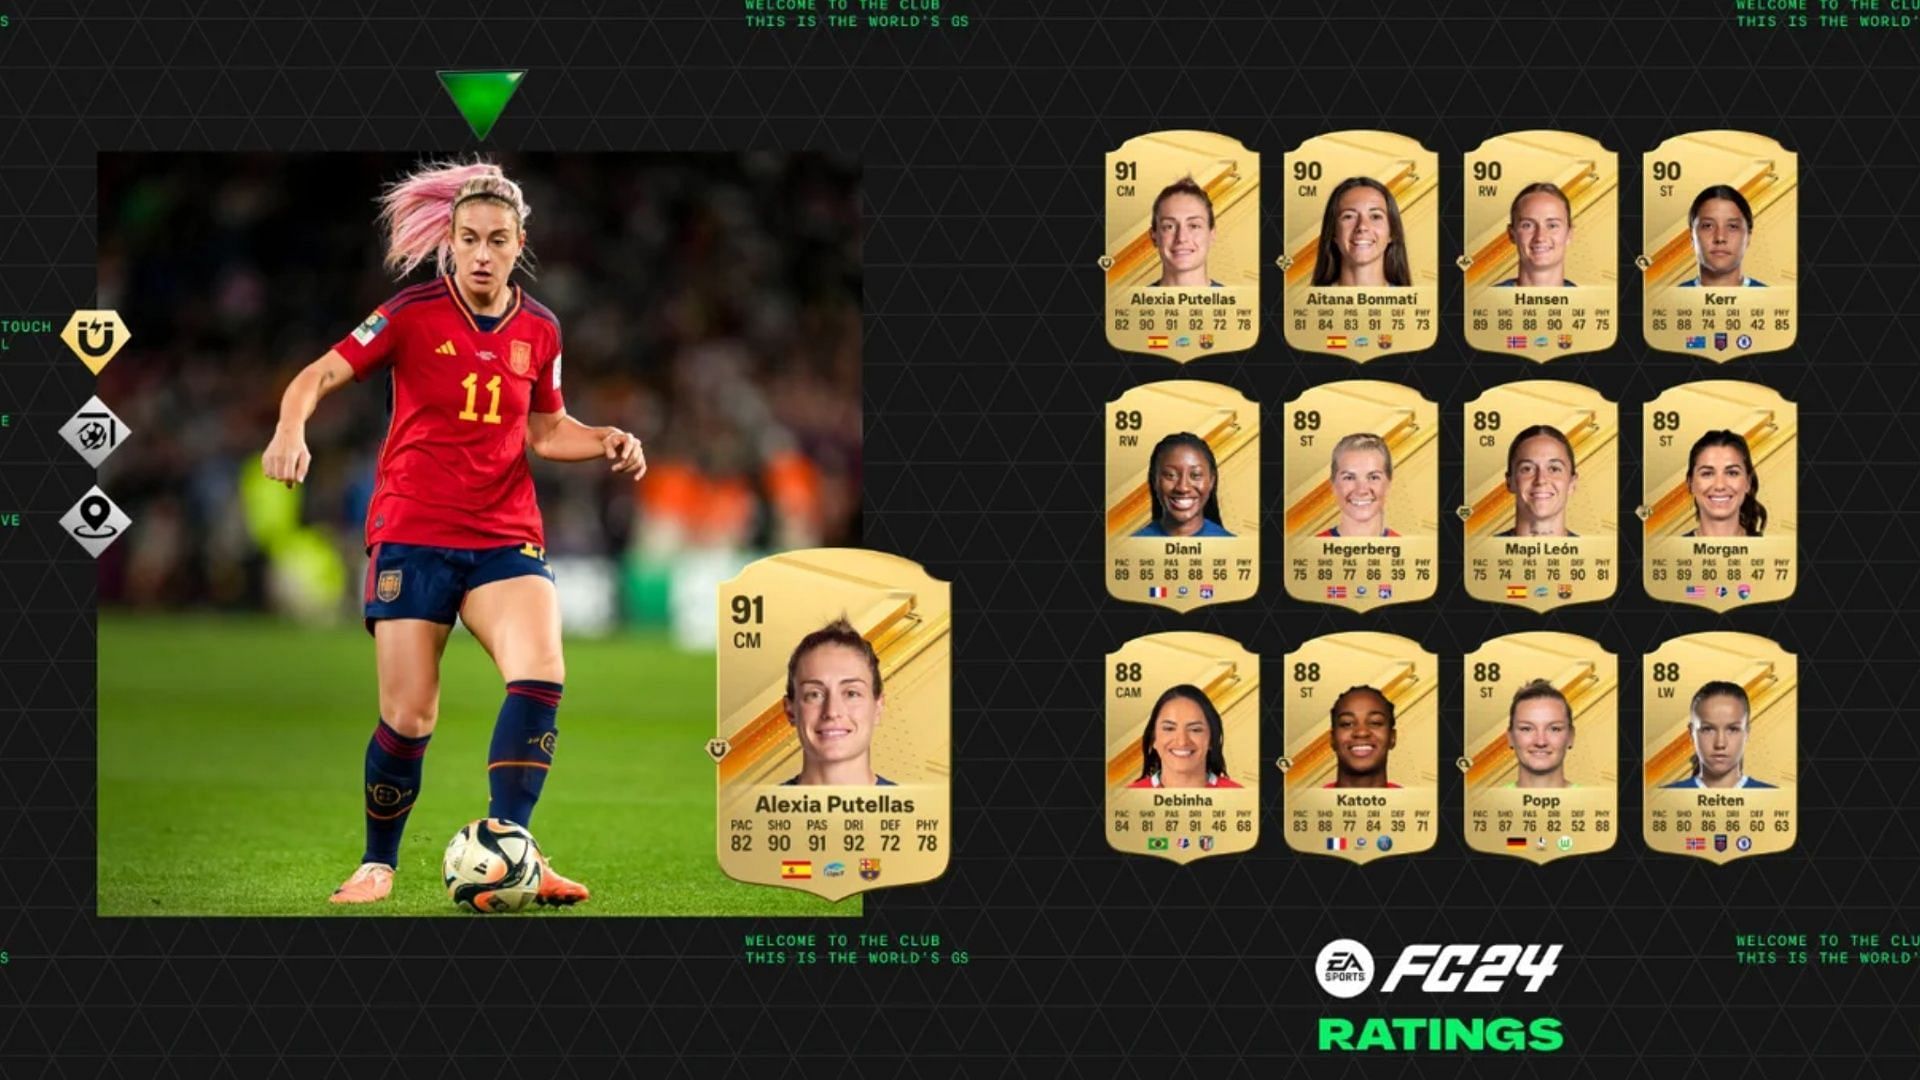 EA FC 24 will have plenty of great cards from women